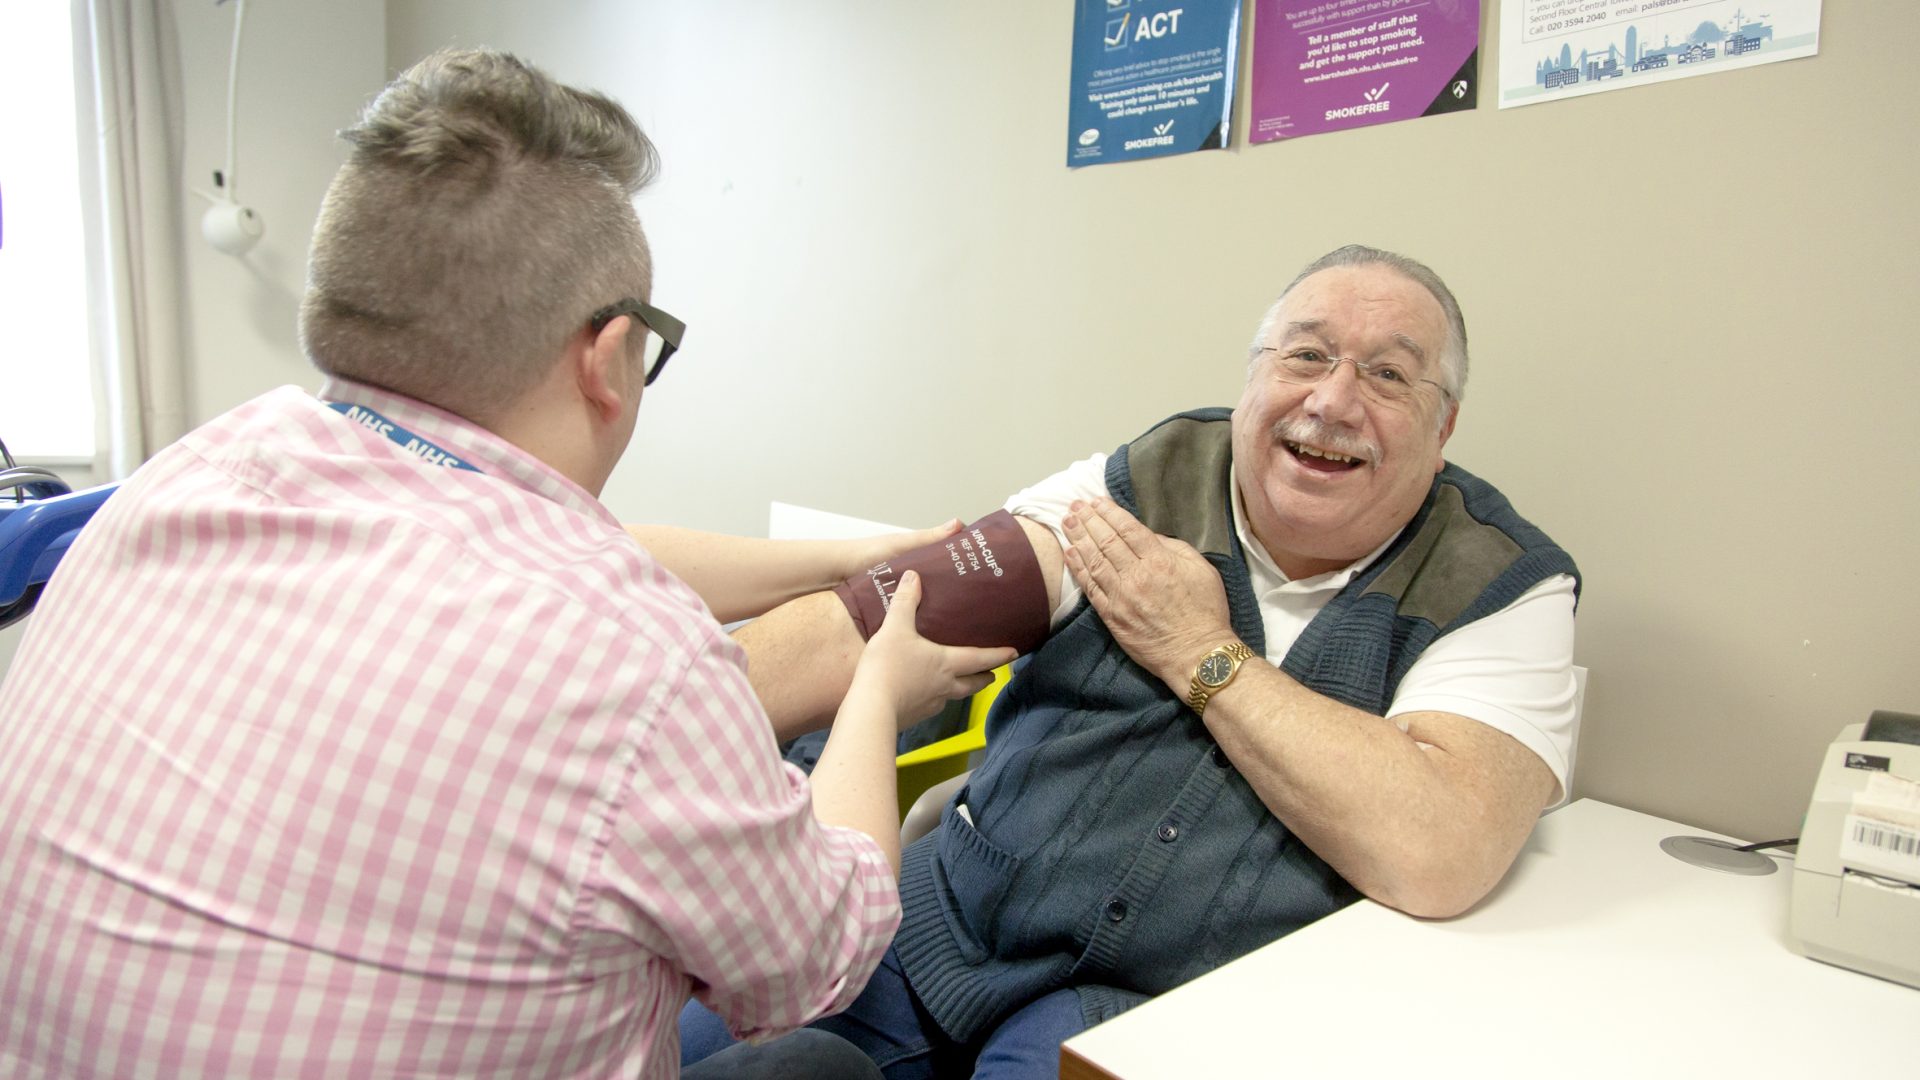 A man has his blood pressure taken by a doctor